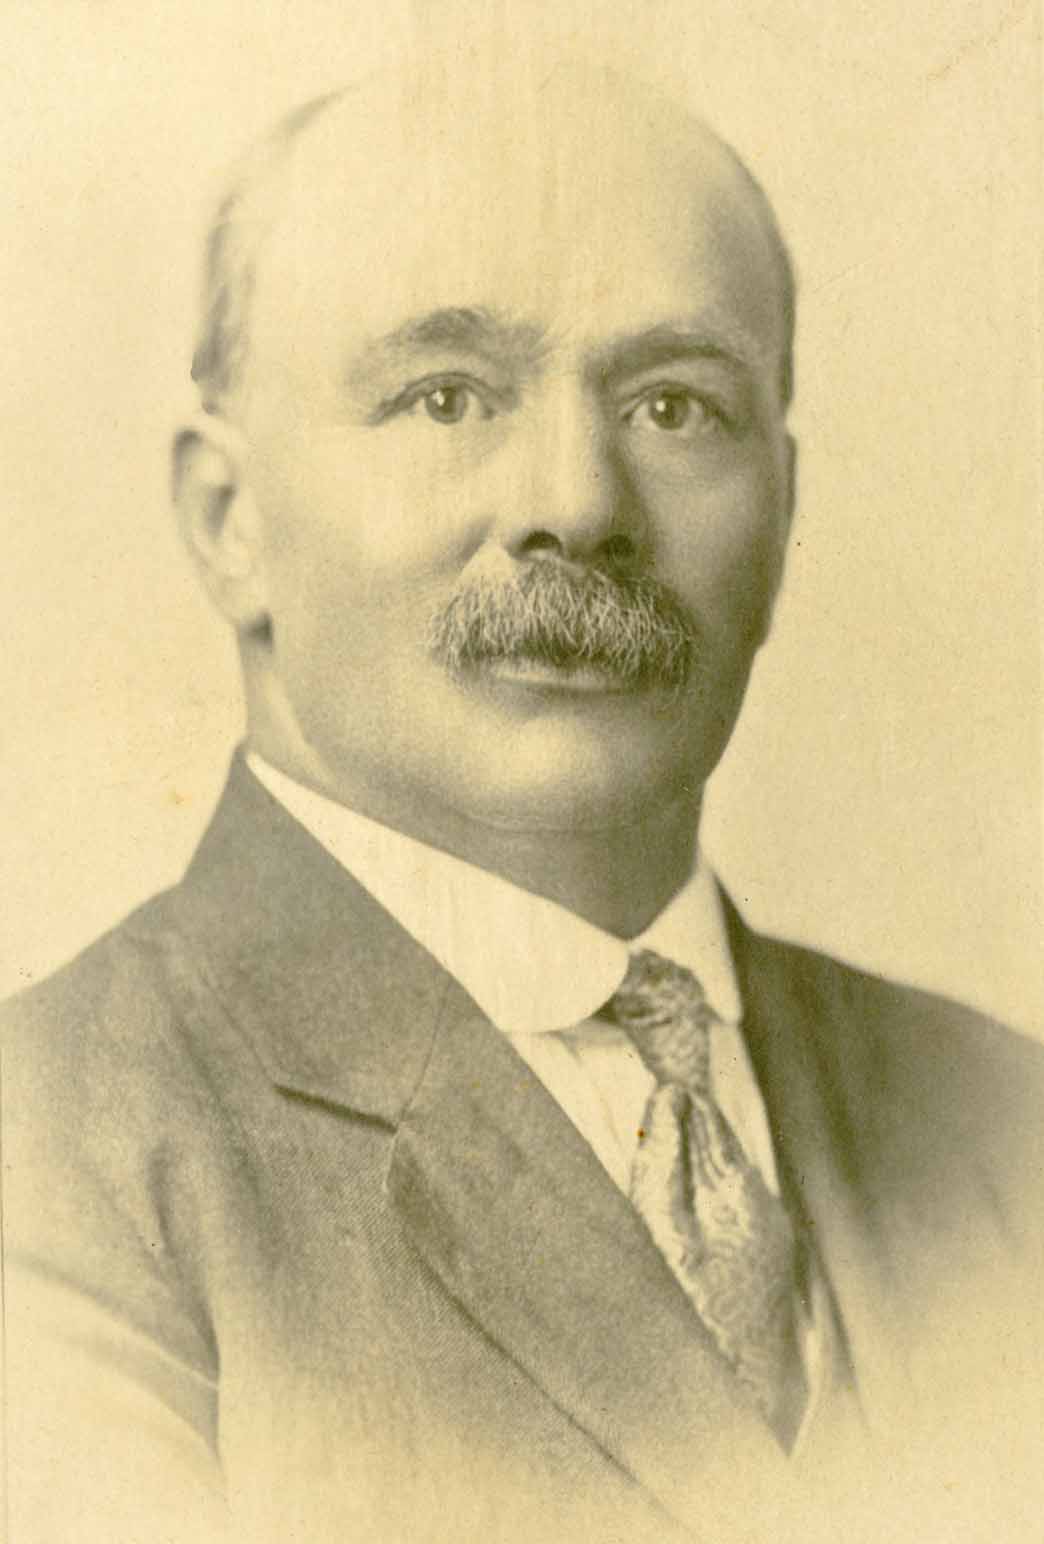 Thomas Flye. Source: City of Winnipeg Archives. Photograph Collection [OP6 File 5].